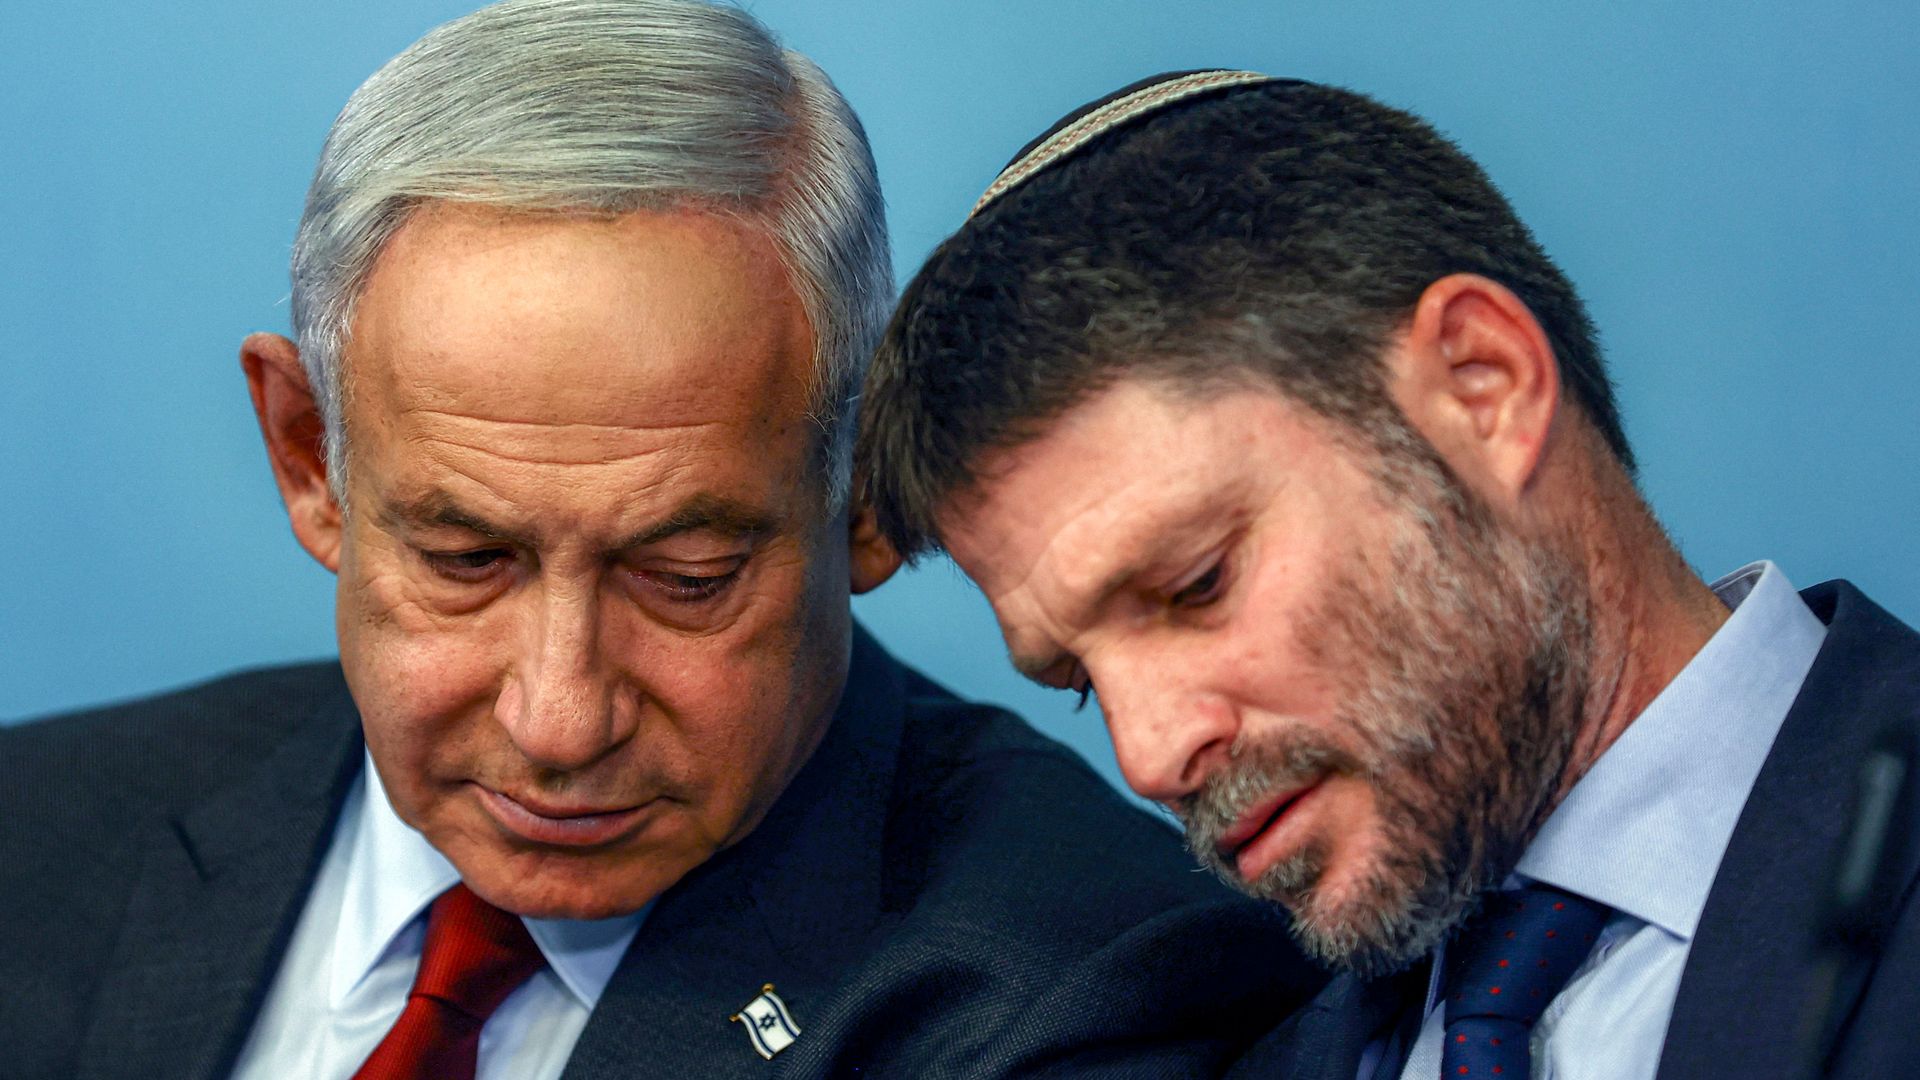 sraeli Prime Minister Benjamin Netanyahu and Finance Minister Bezalel Smotrich attend a press conference at the Prime Minister's office in Jerusalem on January 25, 2023. 